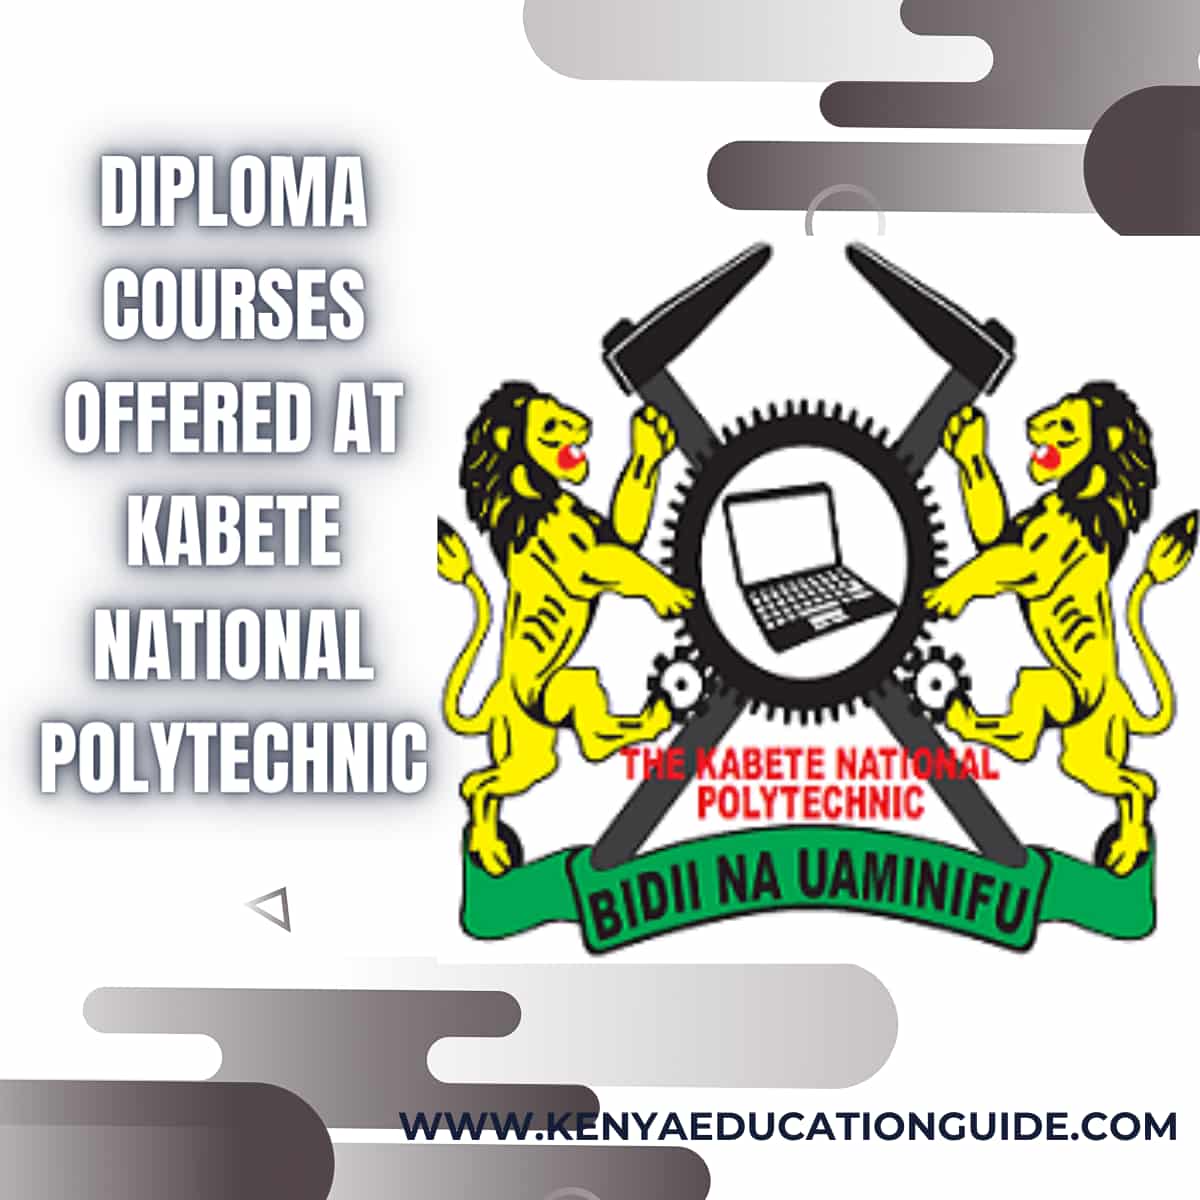 Diploma Courses Offered at Kabete National Polytechnic